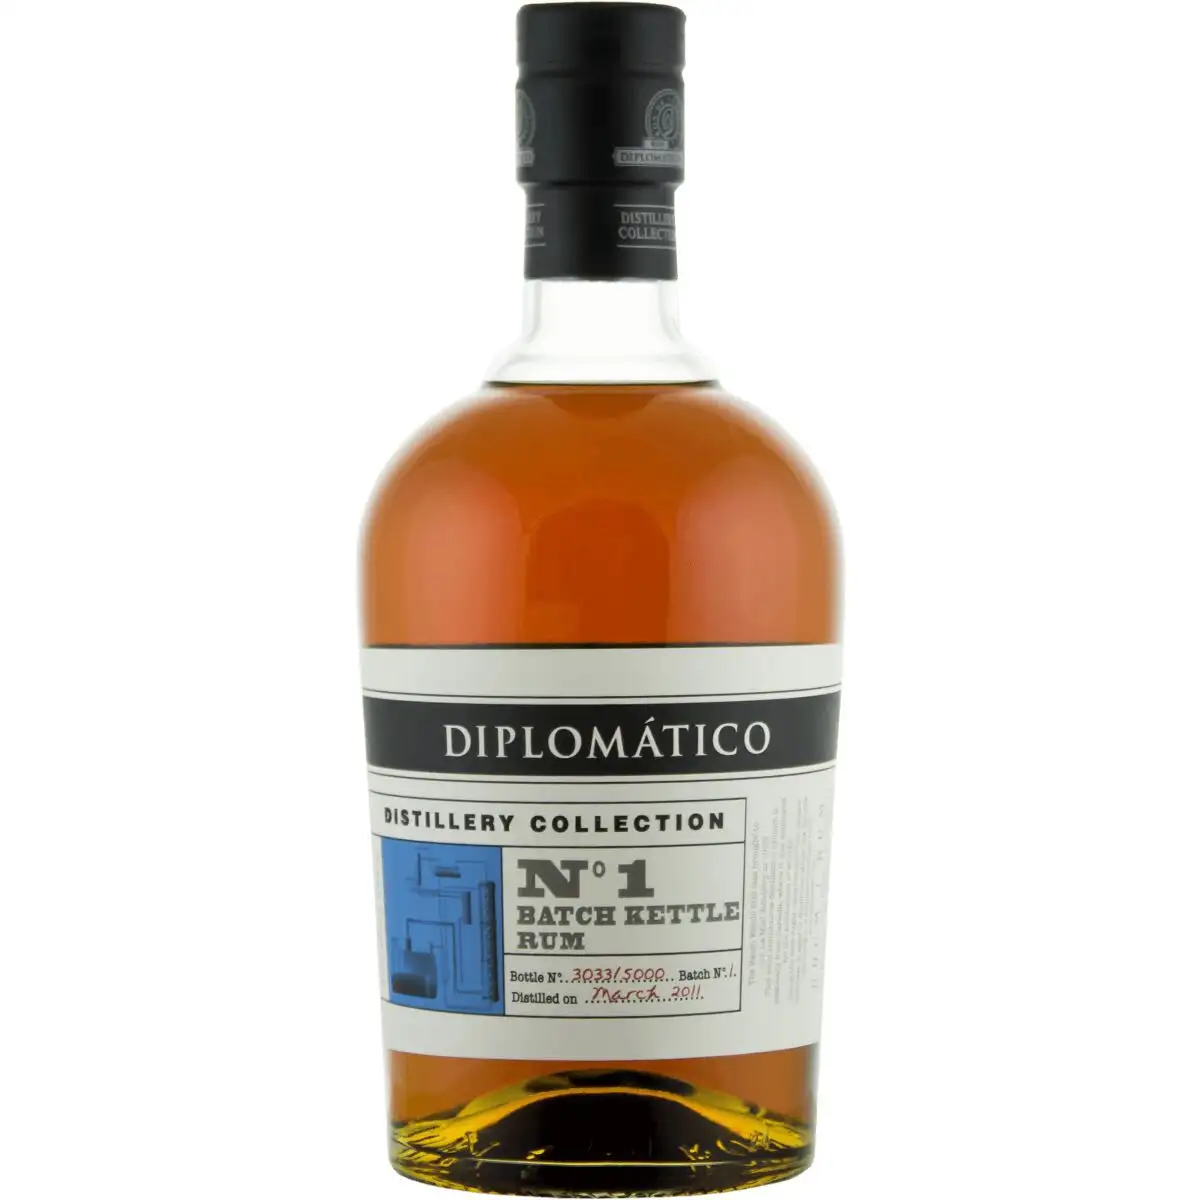 Image of the front of the bottle of the rum Diplomático / Botucal No. 1 Single Batch Kettle Rum